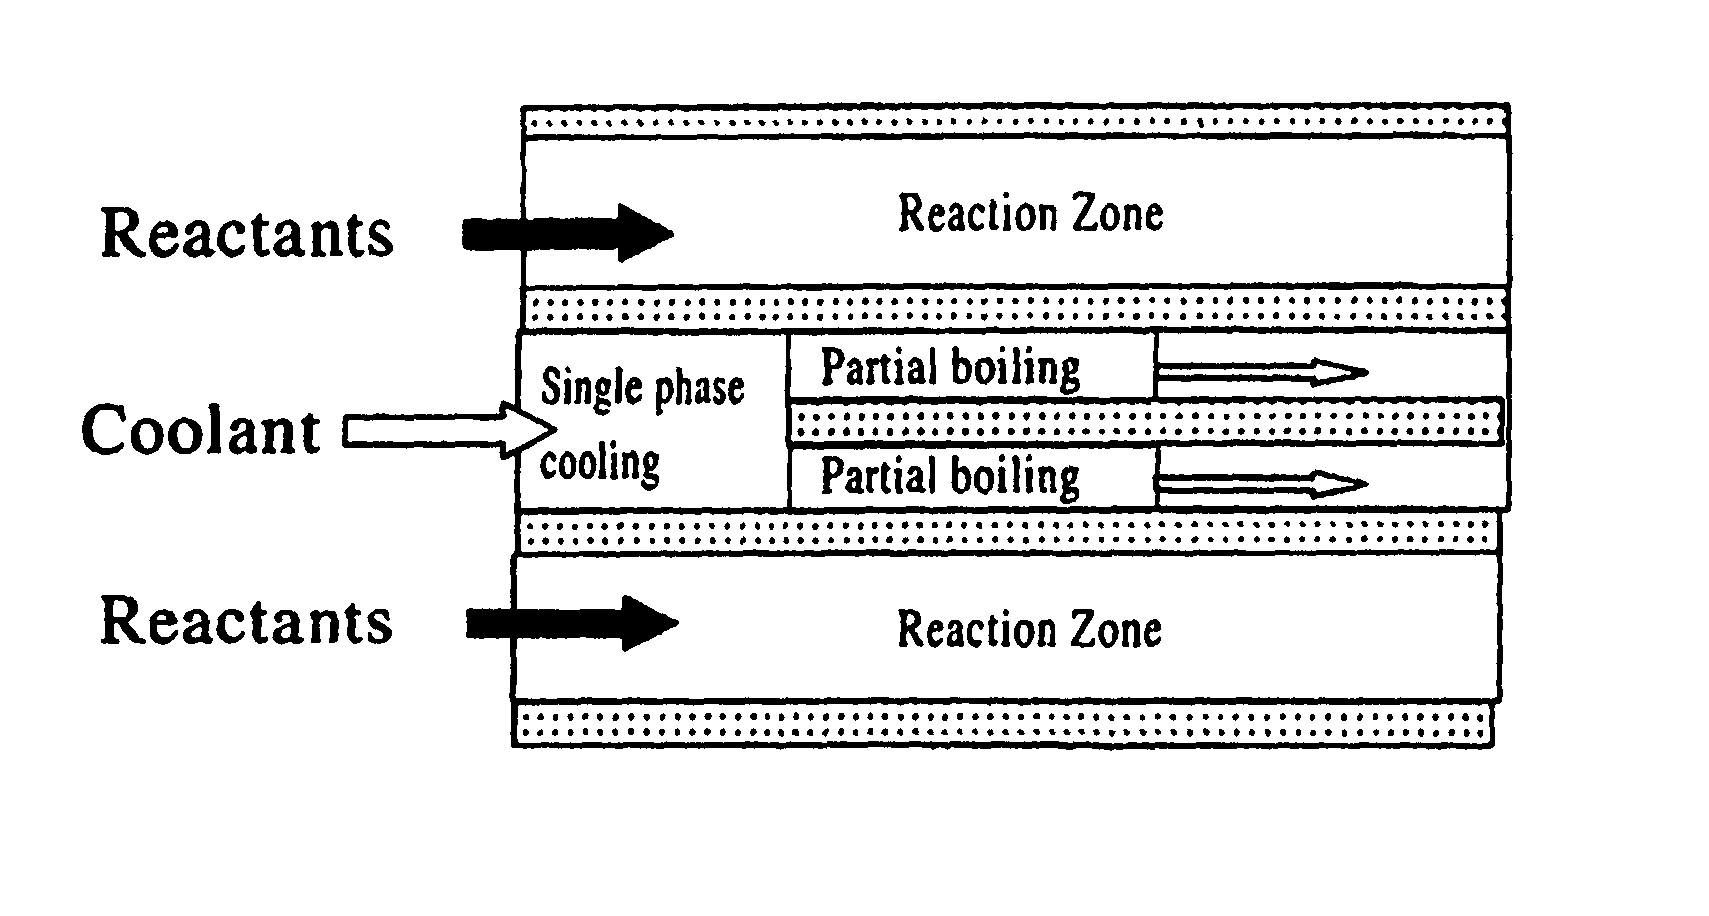 Partial boiling in mini and micro-channels